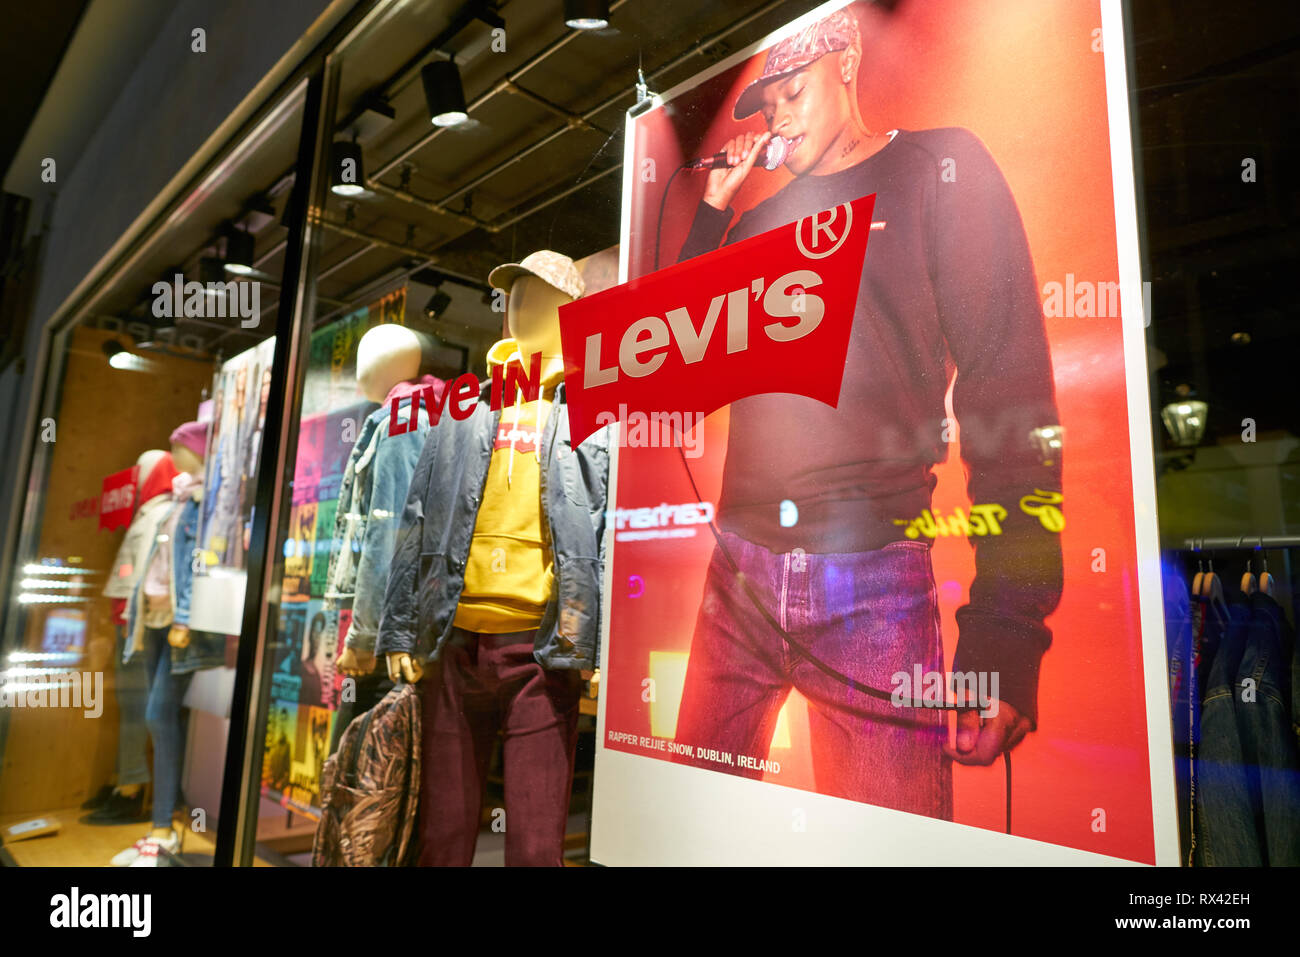 Page 2 - Levis Shop High Resolution Stock Photography and Images - Alamy